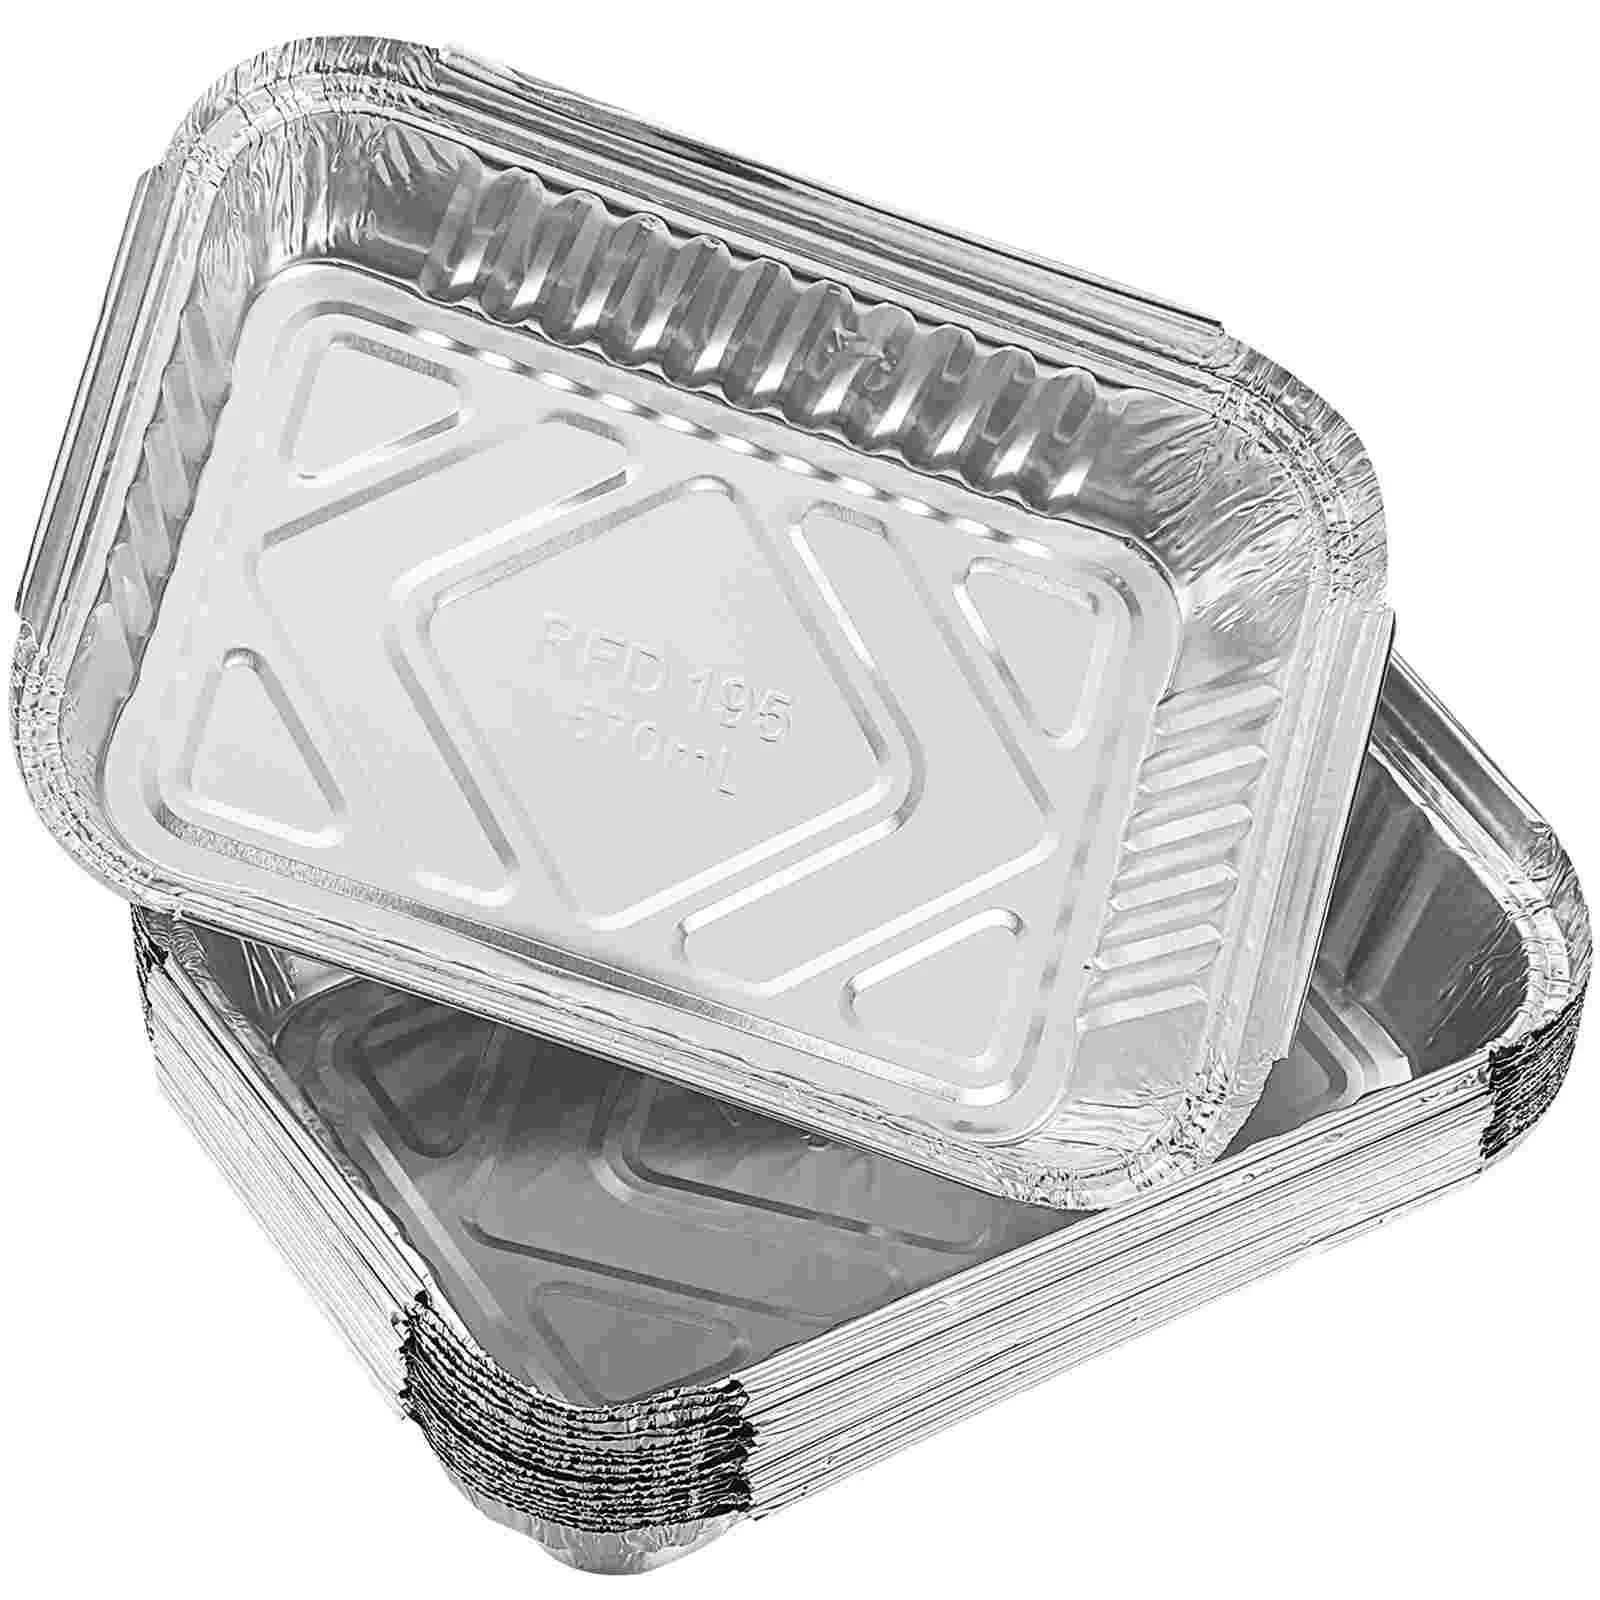 

Aluminum Pans Pan Tray Disposable Drip Grill Trays Grease Baking Bbq Containers Tin Roasting Oven Steam Buffet Deep Table Liners